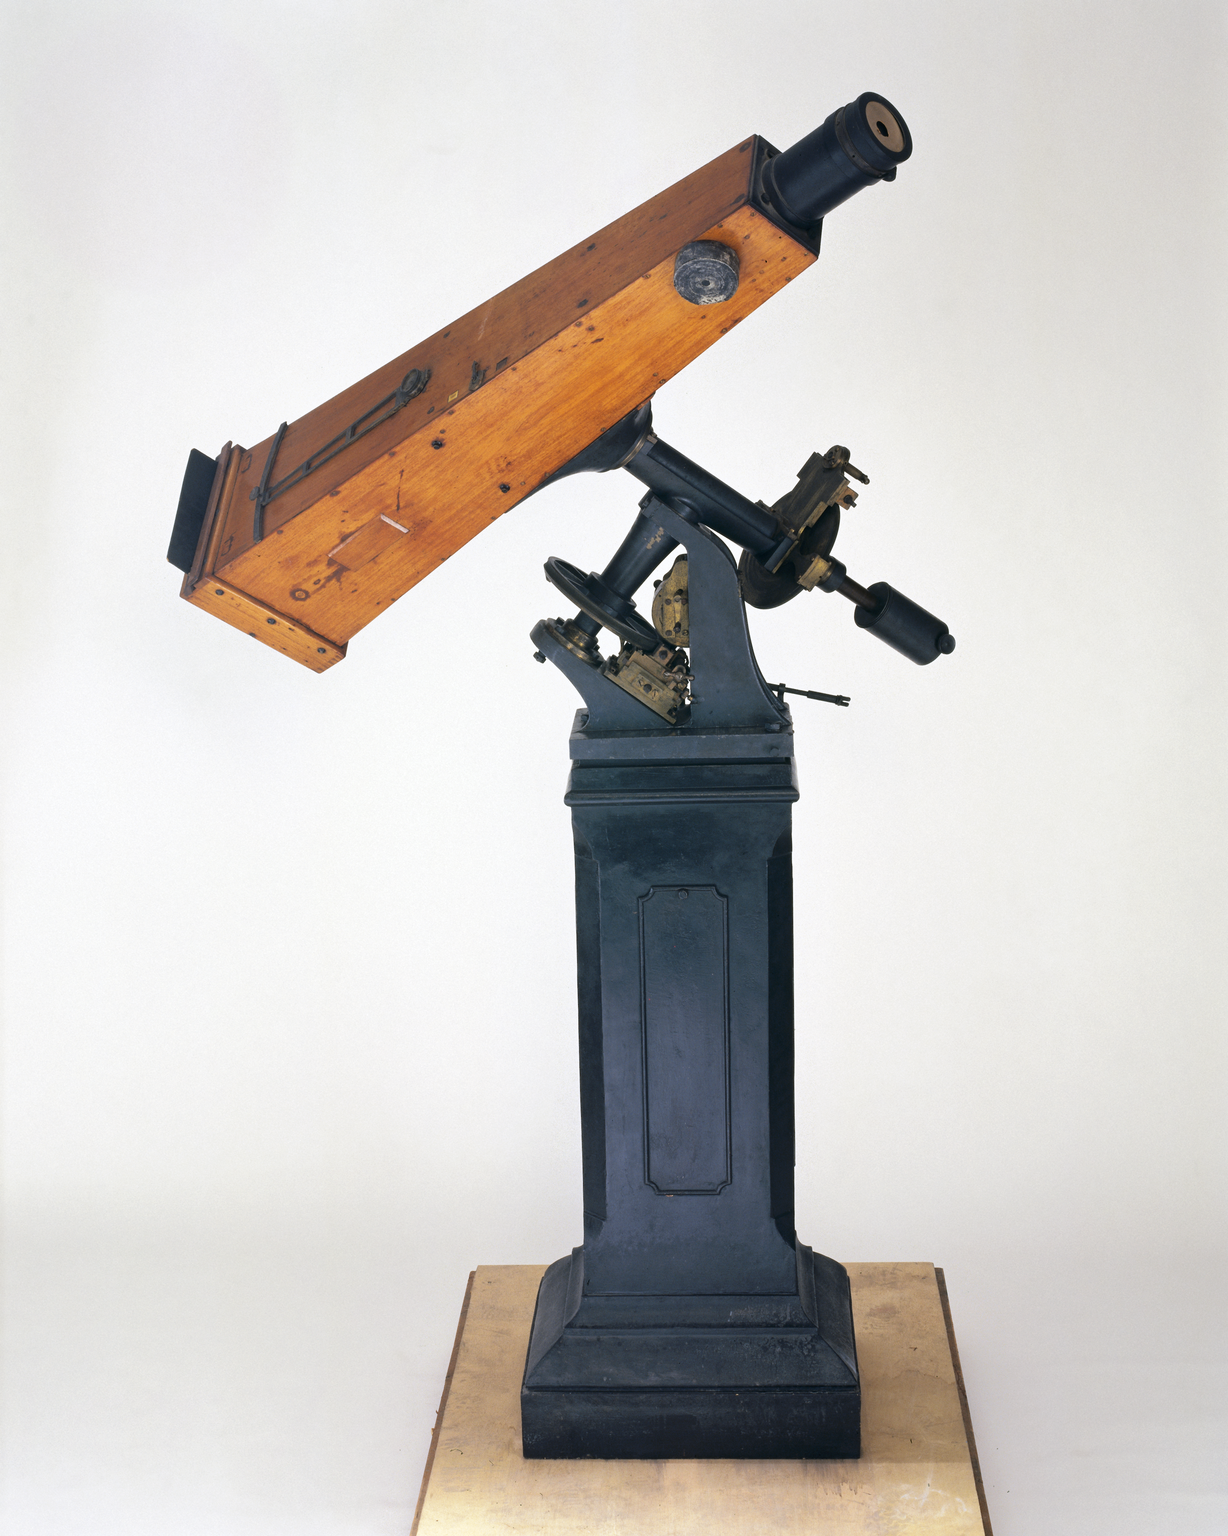 Kew photoheliograph (Science Museum Group. Object no. 1927-124)